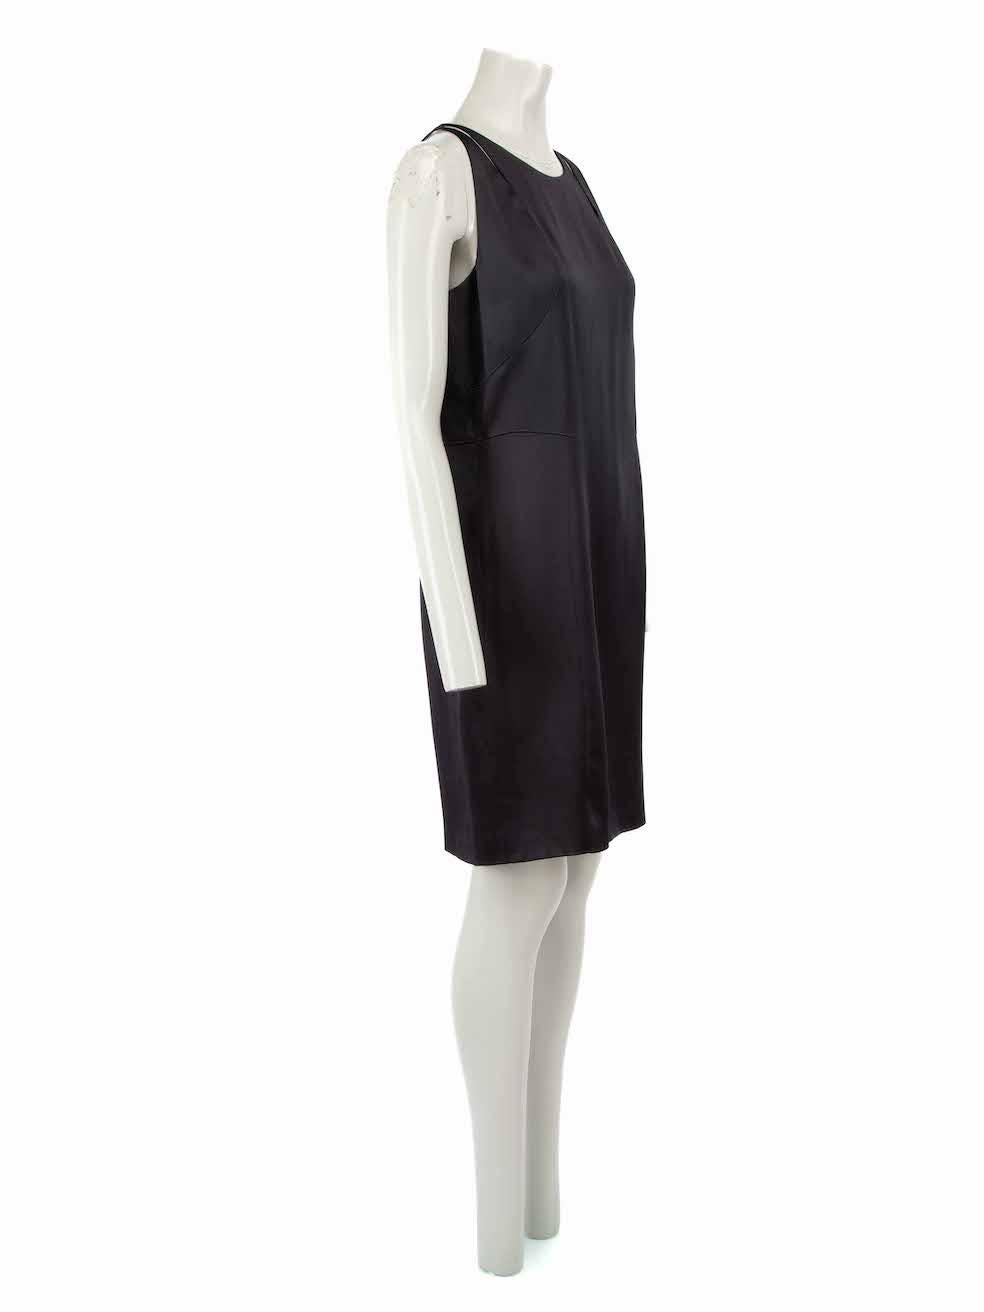 CONDITION is Good. General wear to dress is evident. Moderate signs of wear to the rear with white marks and plucks to the weave at the front on this used Jil Sander designer resale item.
  
Details
Black
Synthetic
Dress
Mini
Figure hugging